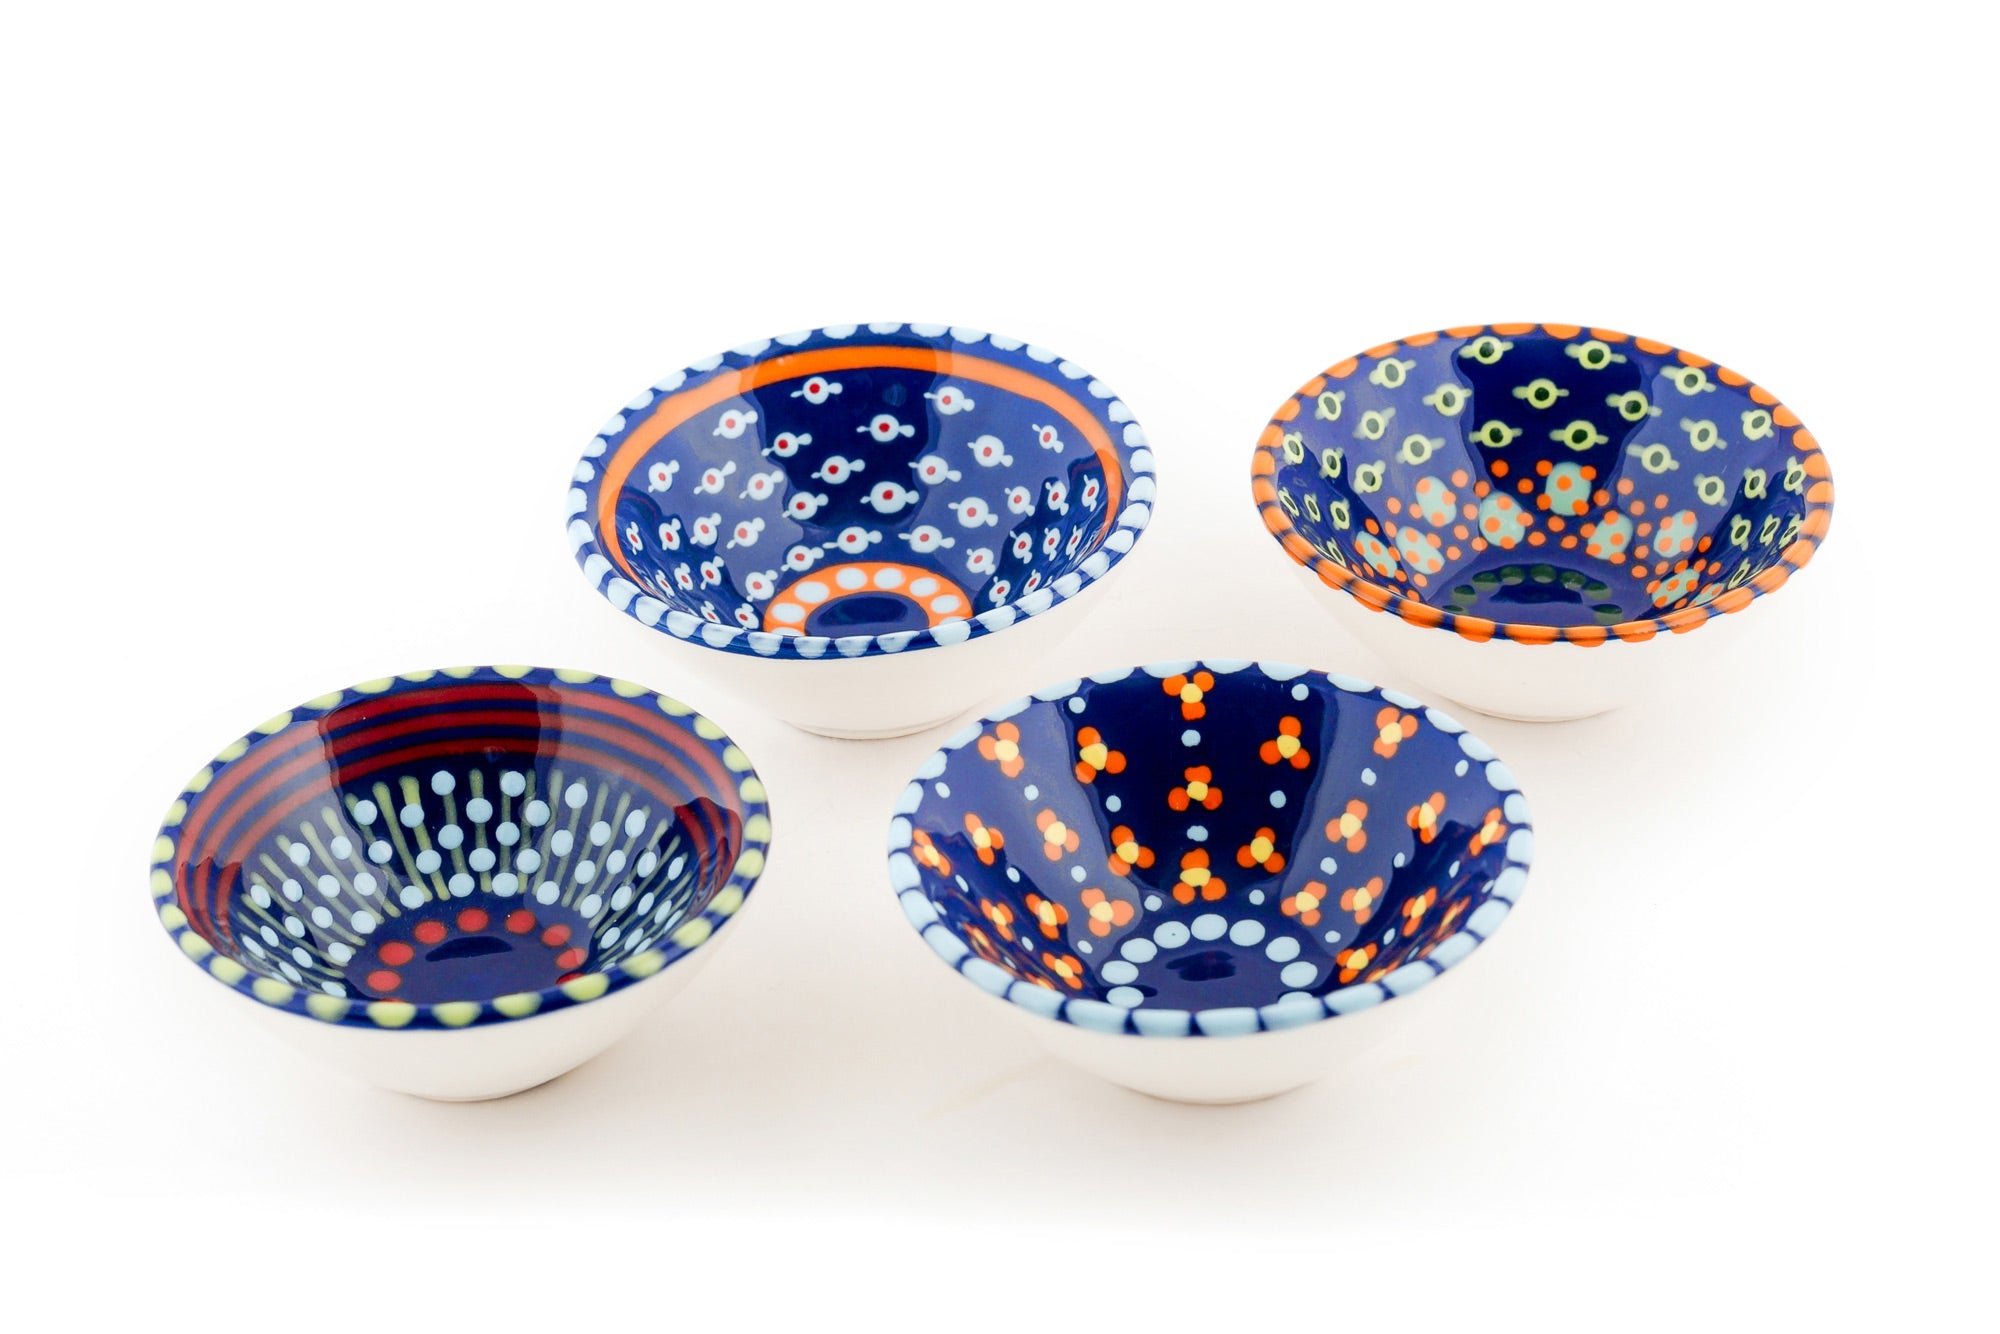 4 Indigo tiny bowls.  Indigo blue base color with variations of the designs on the blue in read, orange, yellow, baby blue and jasper green.  